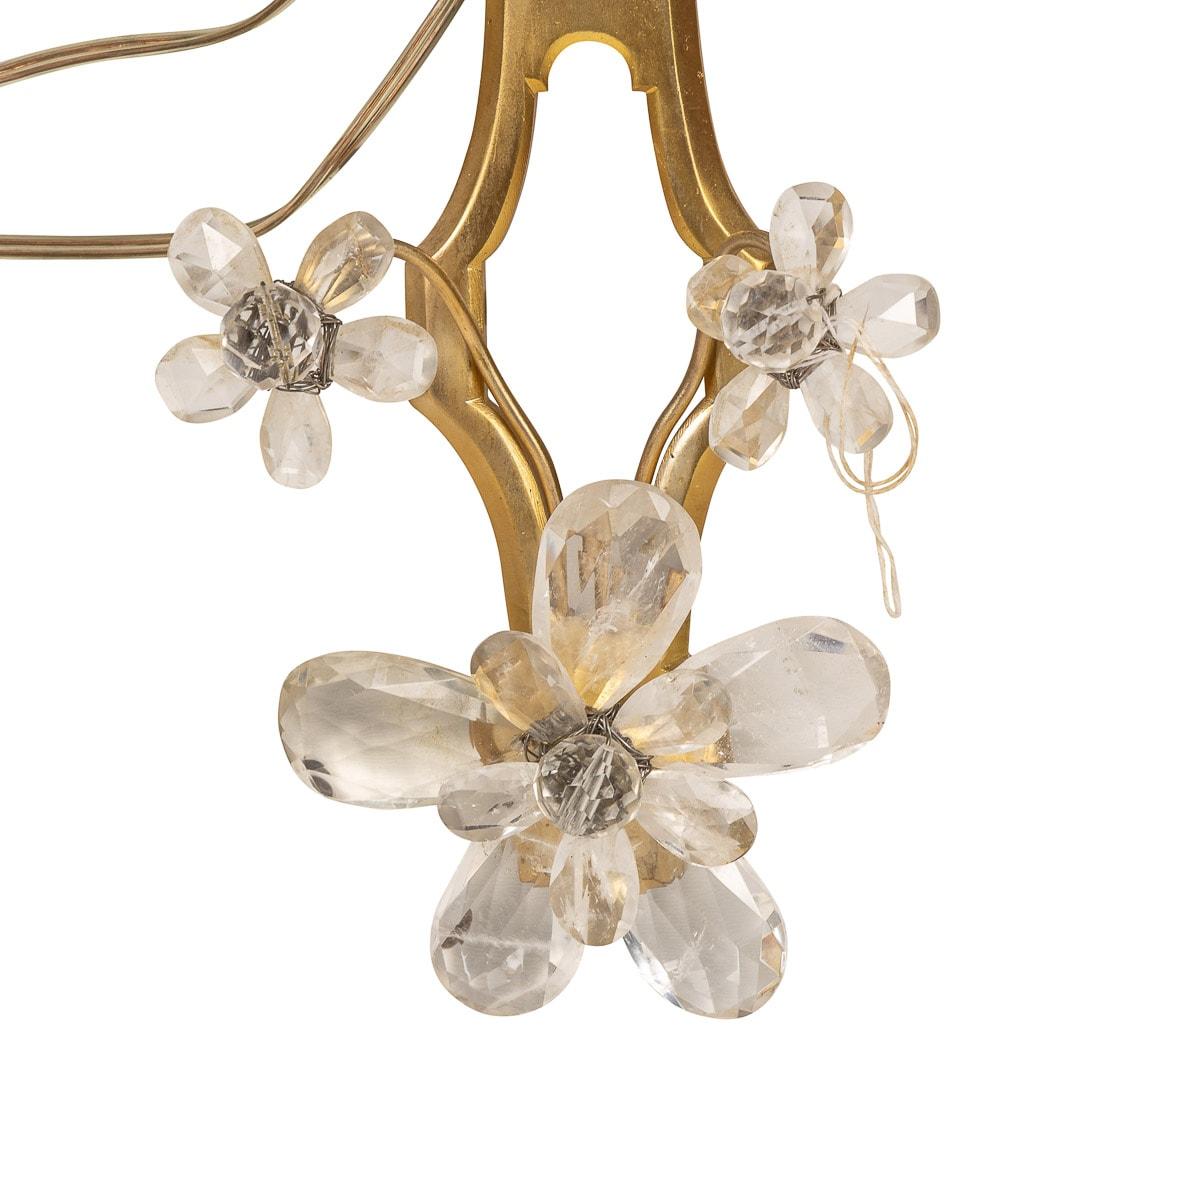 20th Century French Baroque Style D'appliques Wall Lights, Maison Bagues, c.1900 For Sale 2